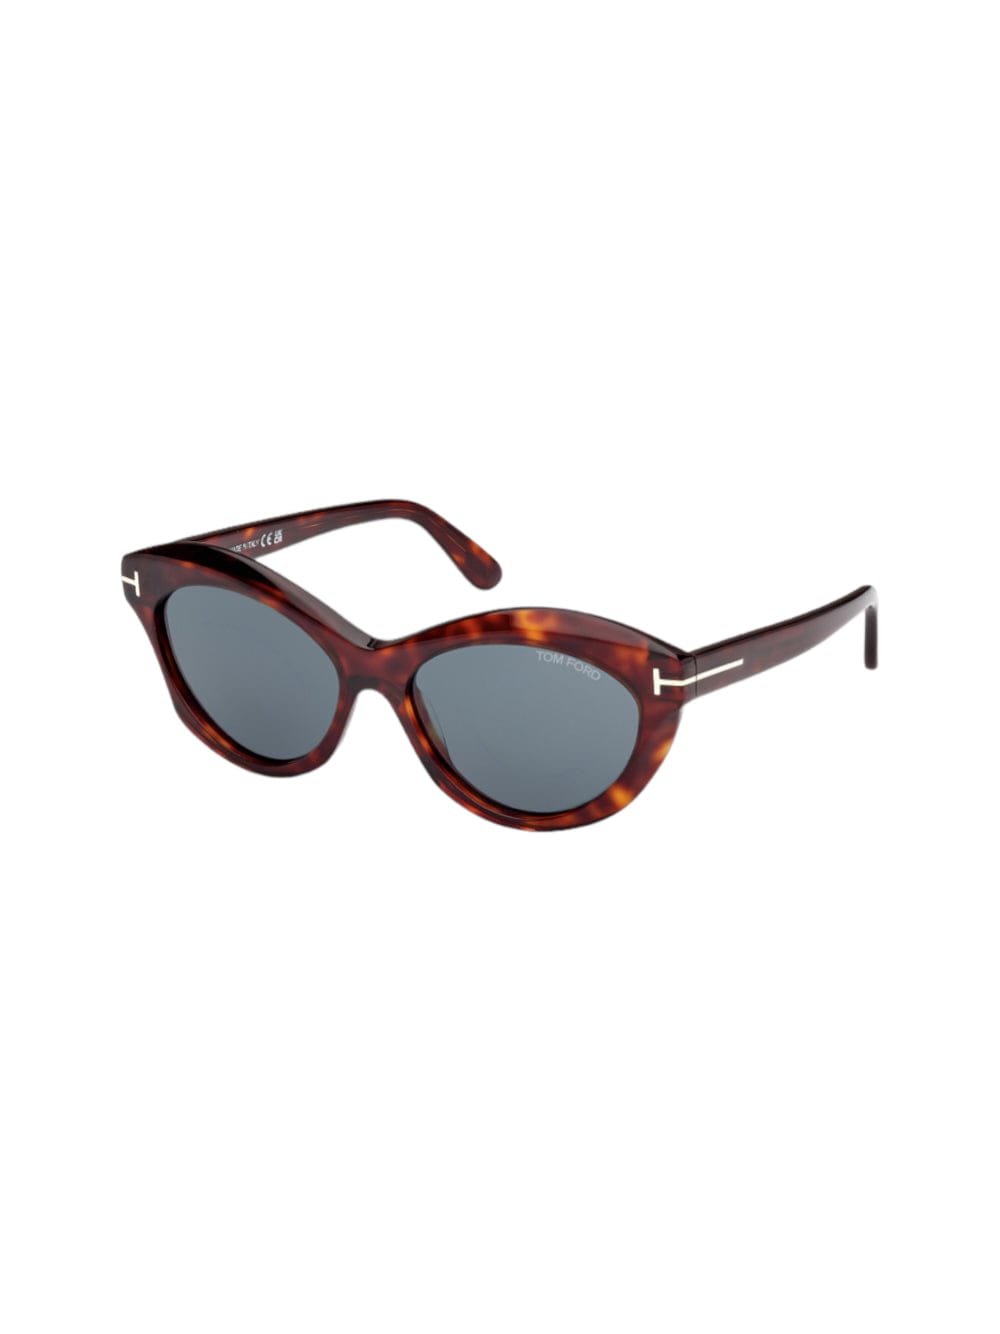 Tom Ford Toni - Tf 1111 /s Sunglasses In Brown